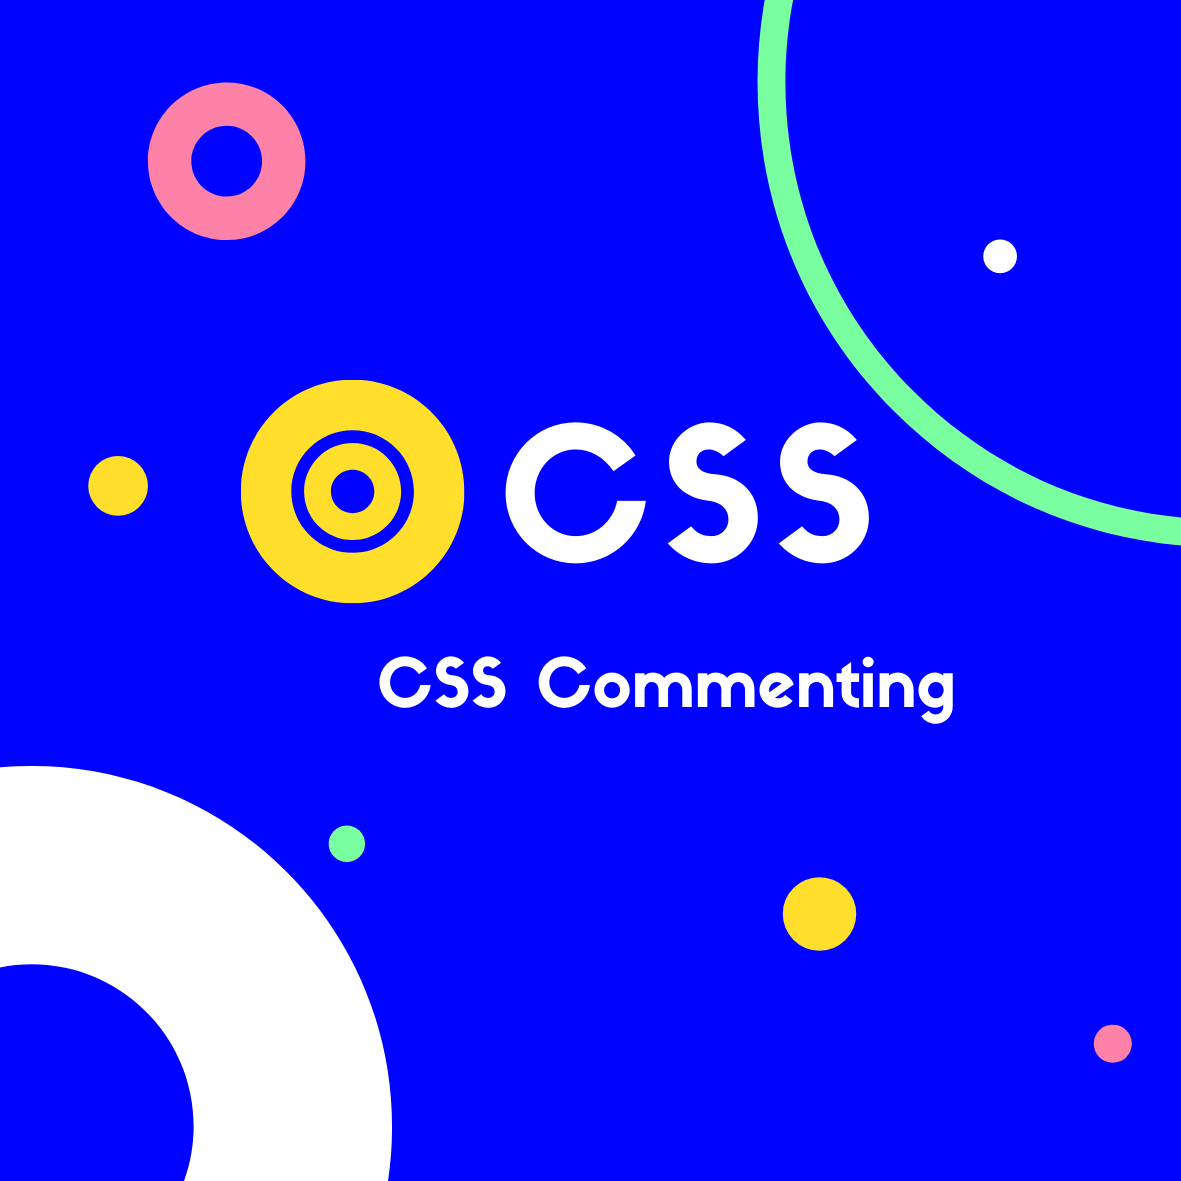 CSS Commenting